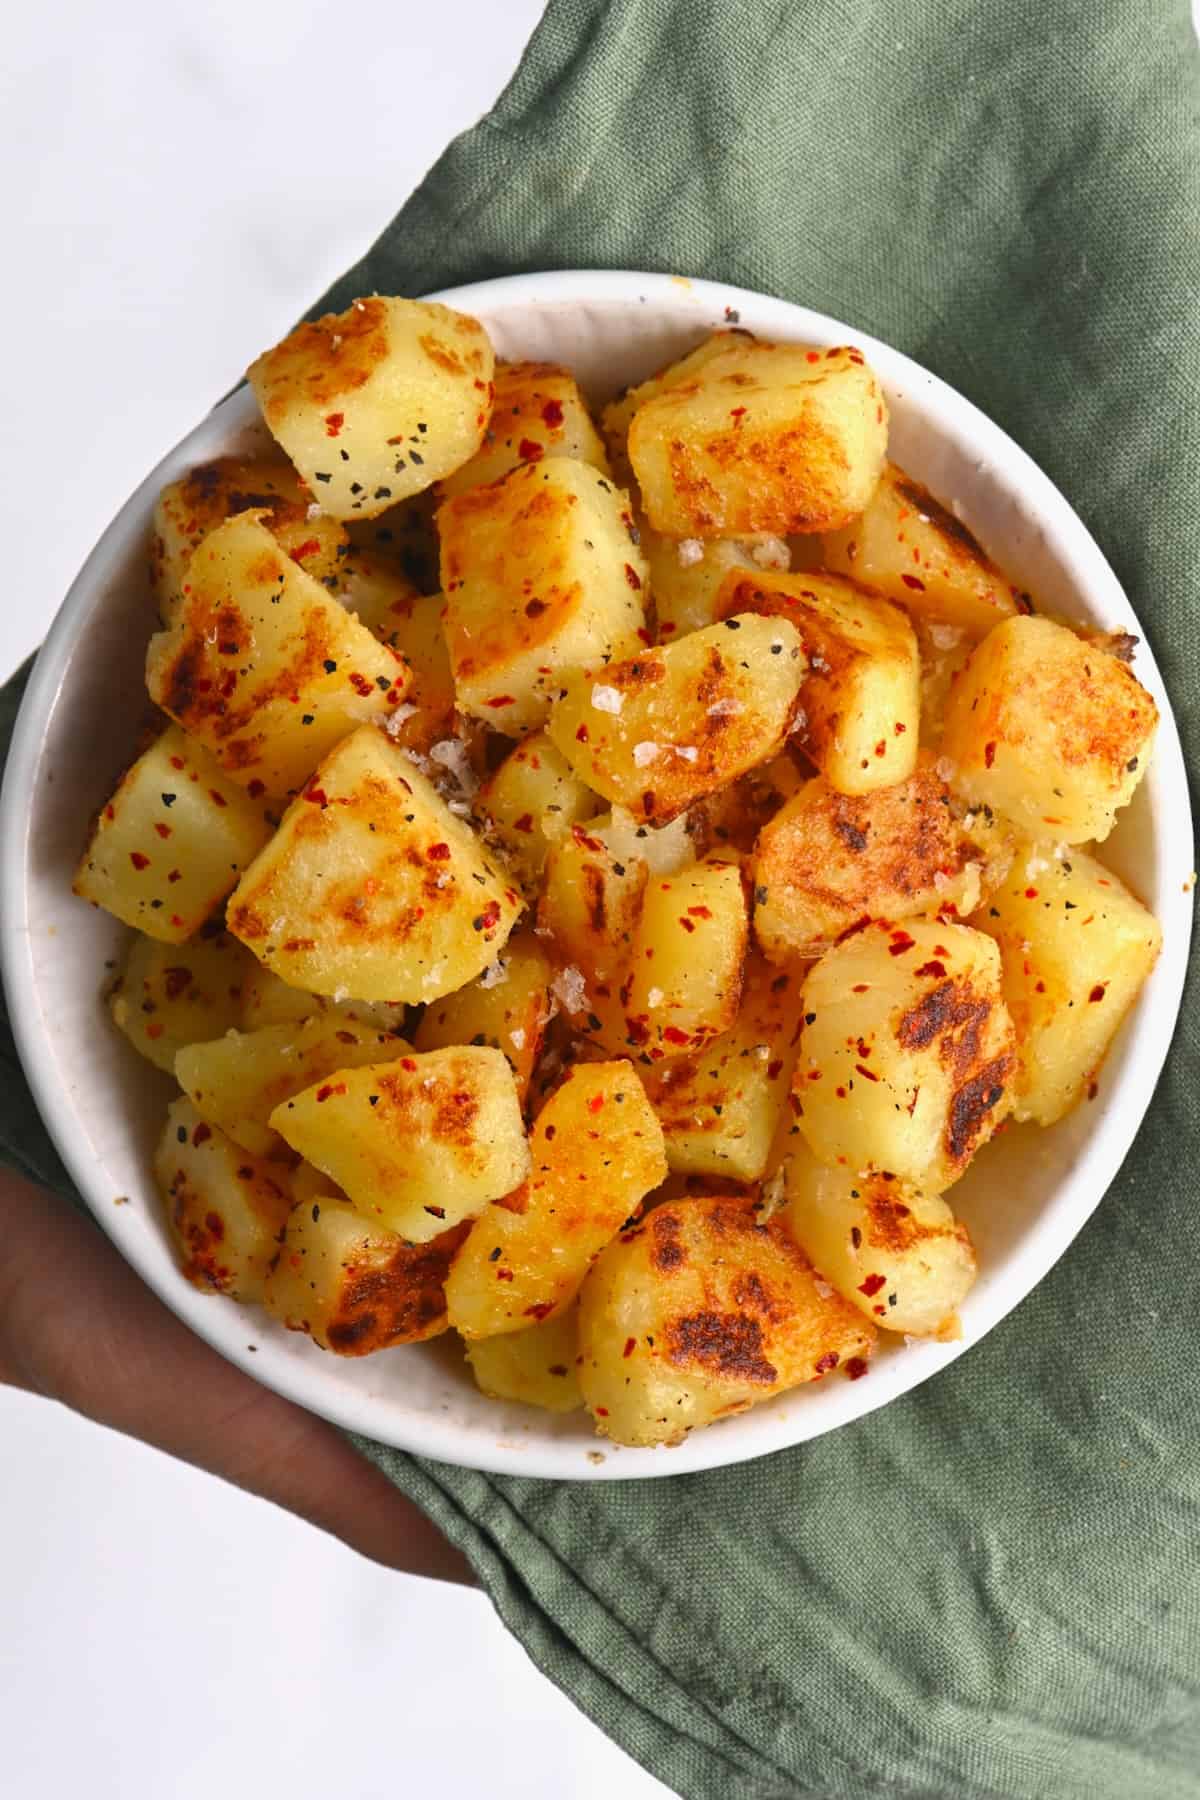 Home fries topped with salt and paprika in a bowl